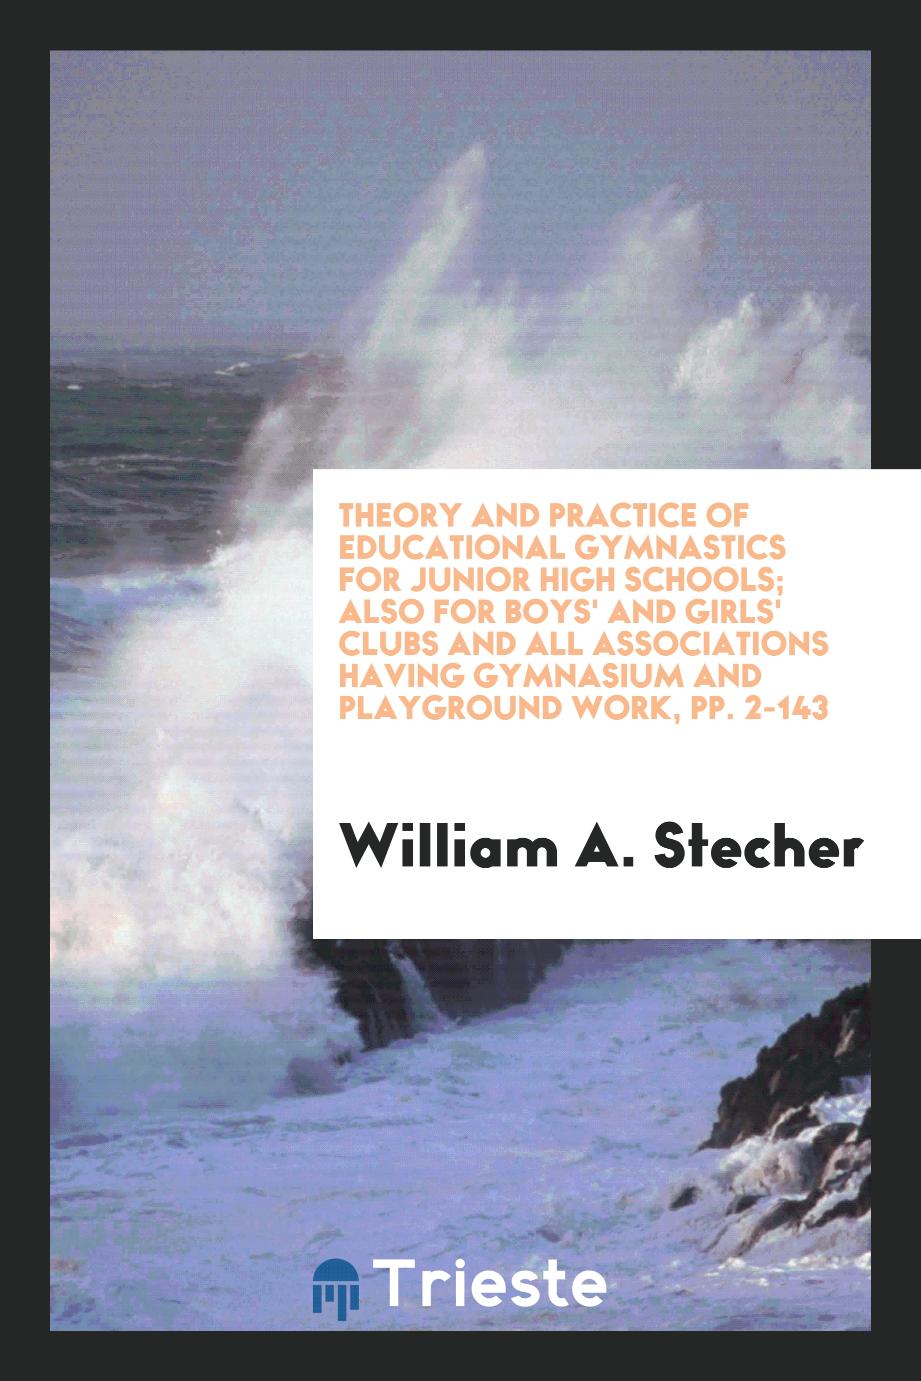 Theory and Practice of Educational Gymnastics for Junior High Schools; Also for Boys' and Girls' Clubs and All Associations Having Gymnasium and Playground Work, pp. 2-143